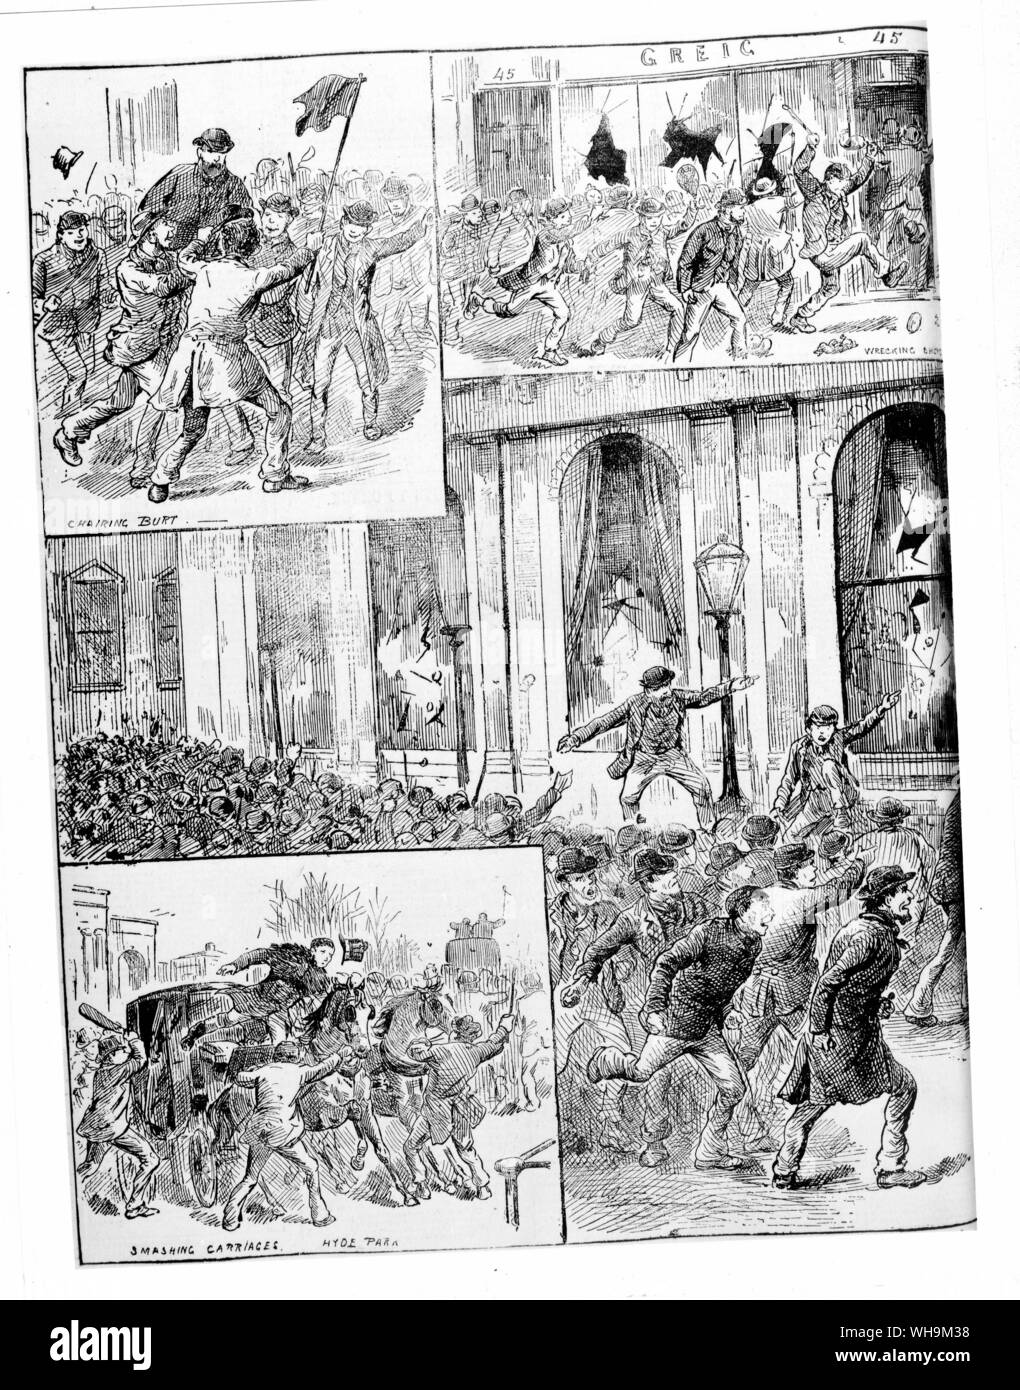 Pictorial News Saturday February 20th 1886: London riots. Stock Photo